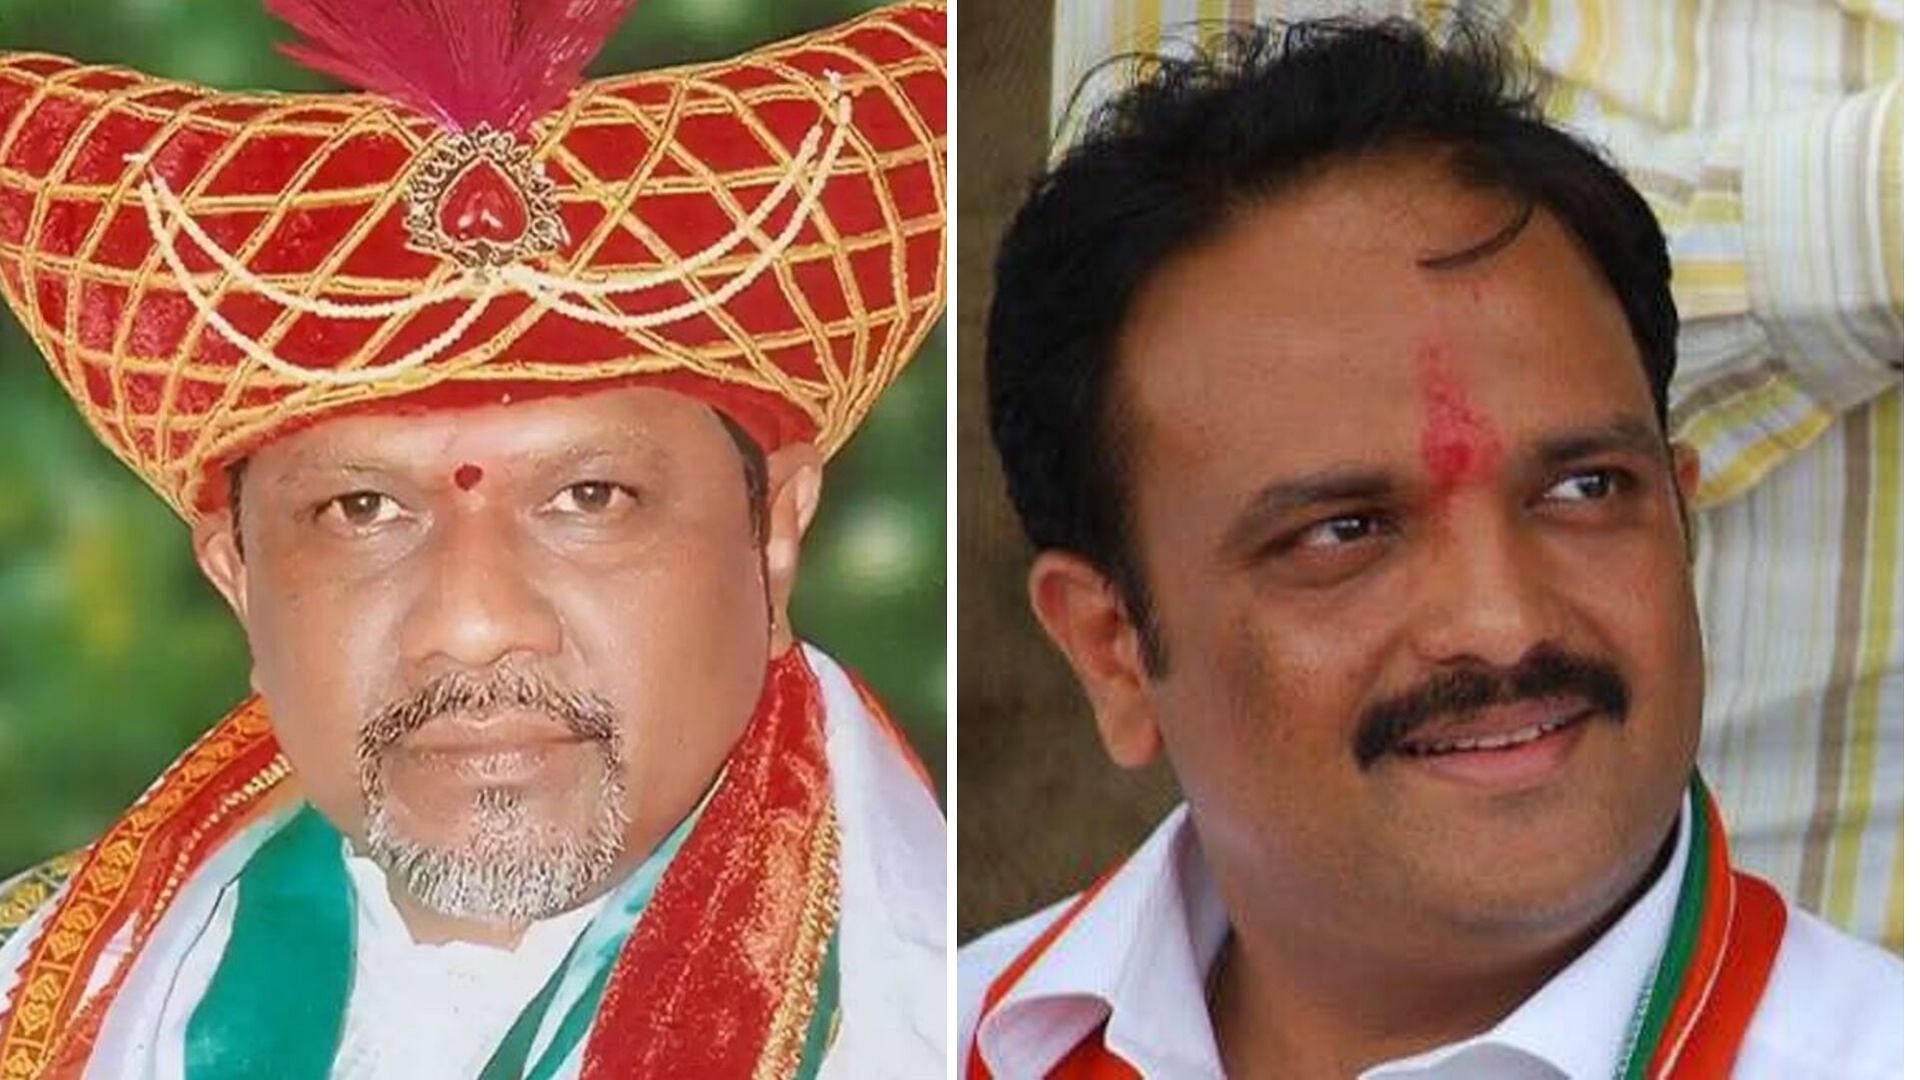 The NCP has released its second list of 20 candidates, featuring senior NCP leader Chhagan Bhujbal’s son Pankaj (right) and former state minister Dharmarao Baba Atram.